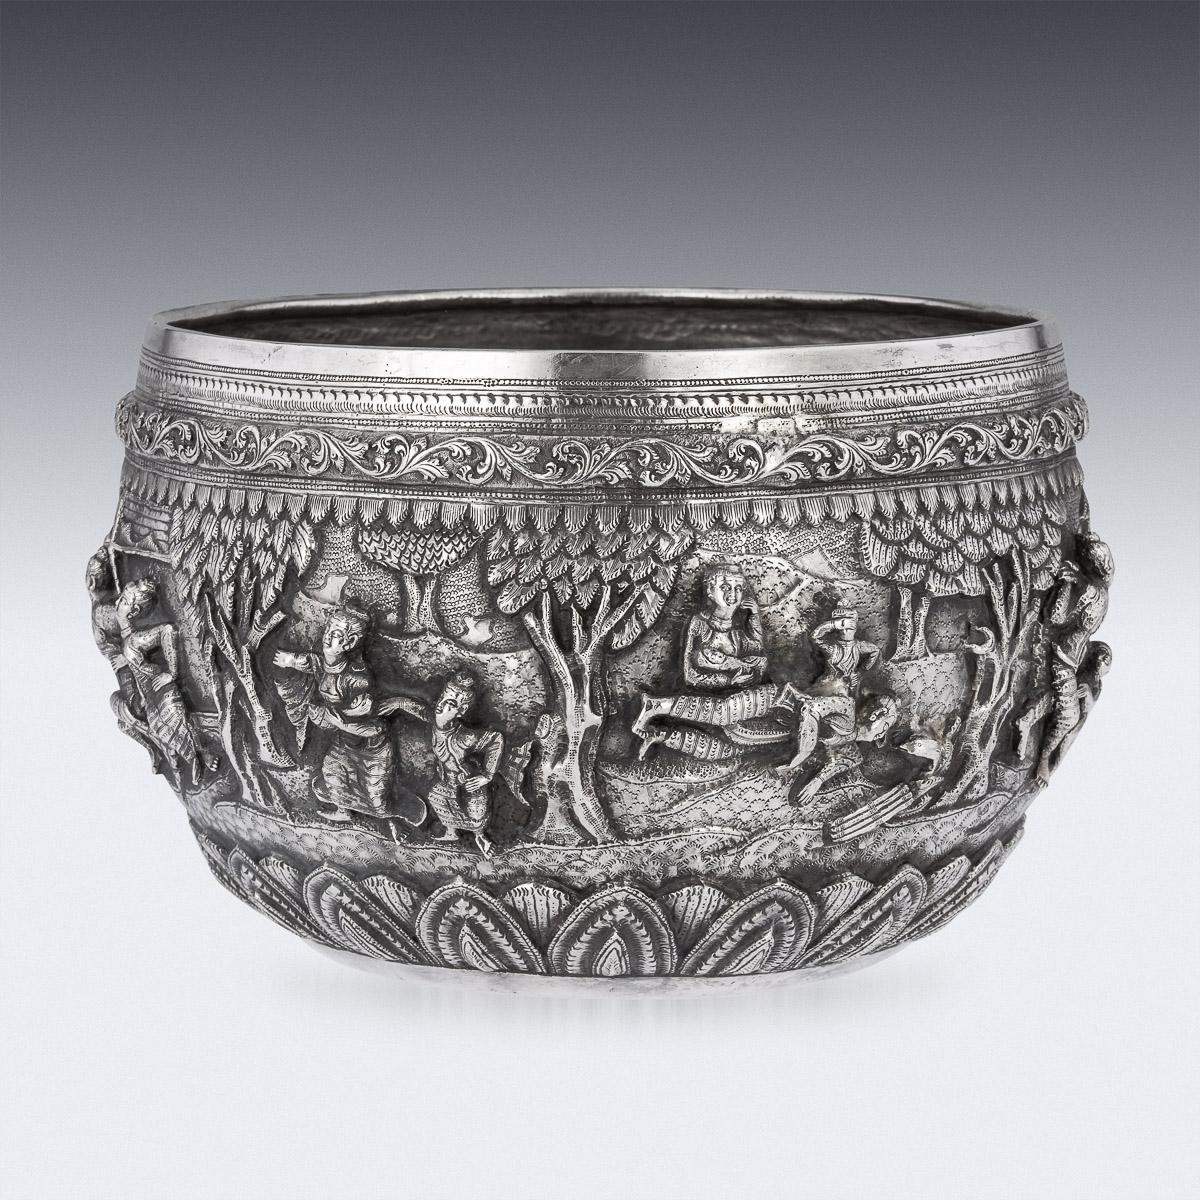 19th Century Burmese silver Thabeik bowl, repousse' decorated in high relief depicting different traditional scenes from the Burmese mythology, showing very detailed figures set against a chiseled matted background in landscapes. Around the top